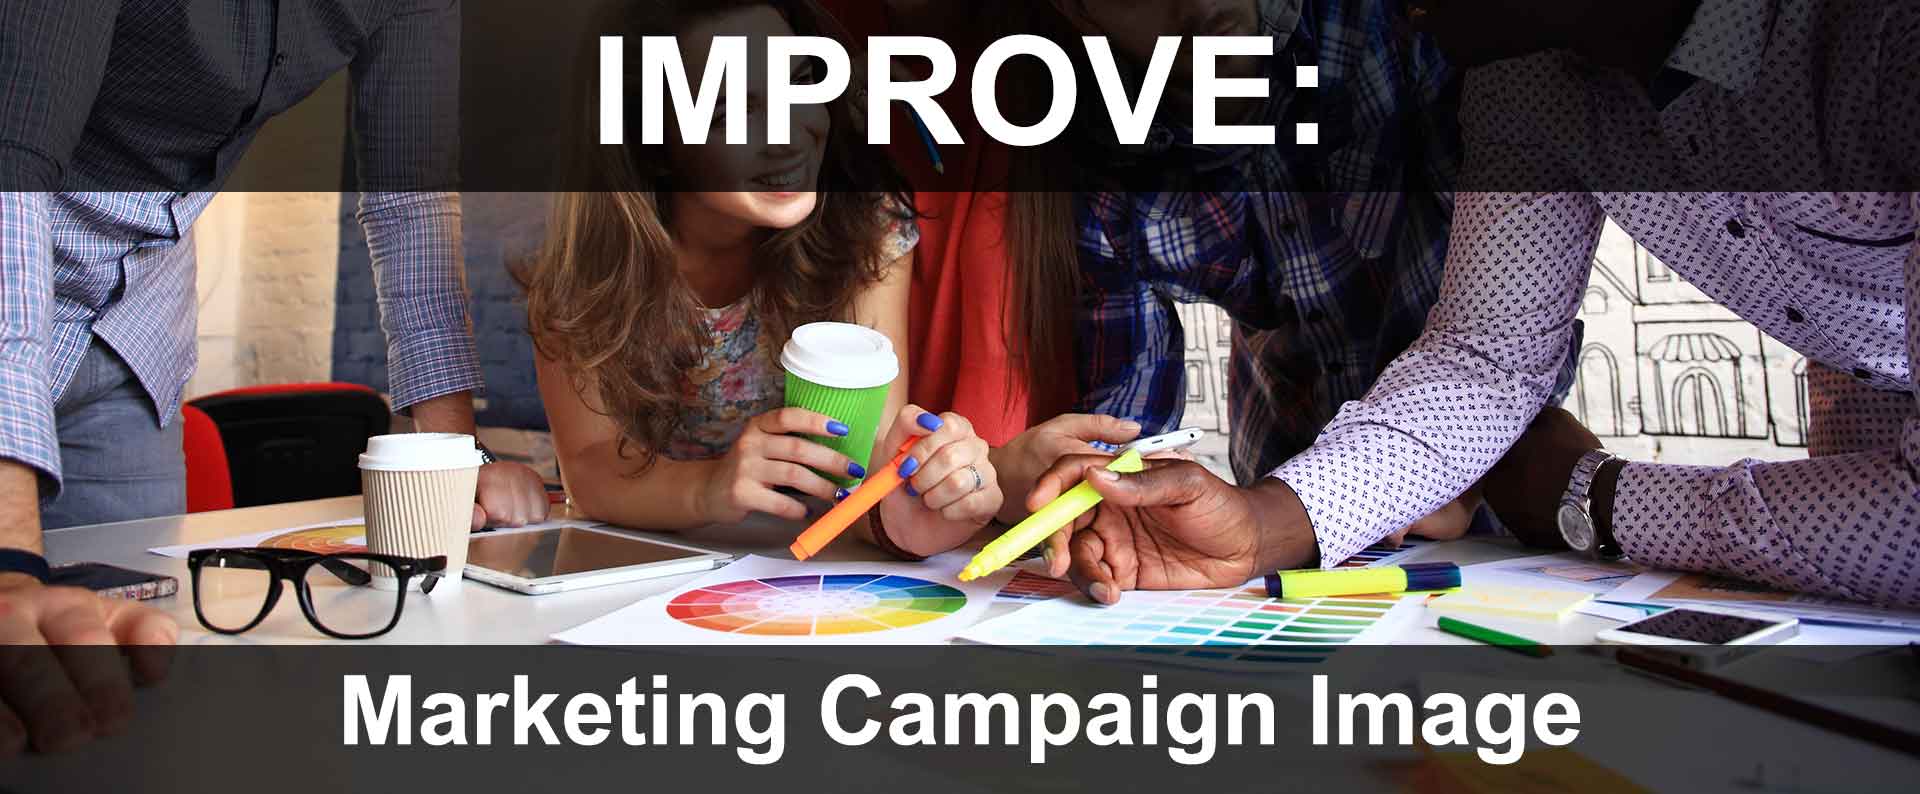 Tips On Creating An Effective Campaign Image Online & Offline